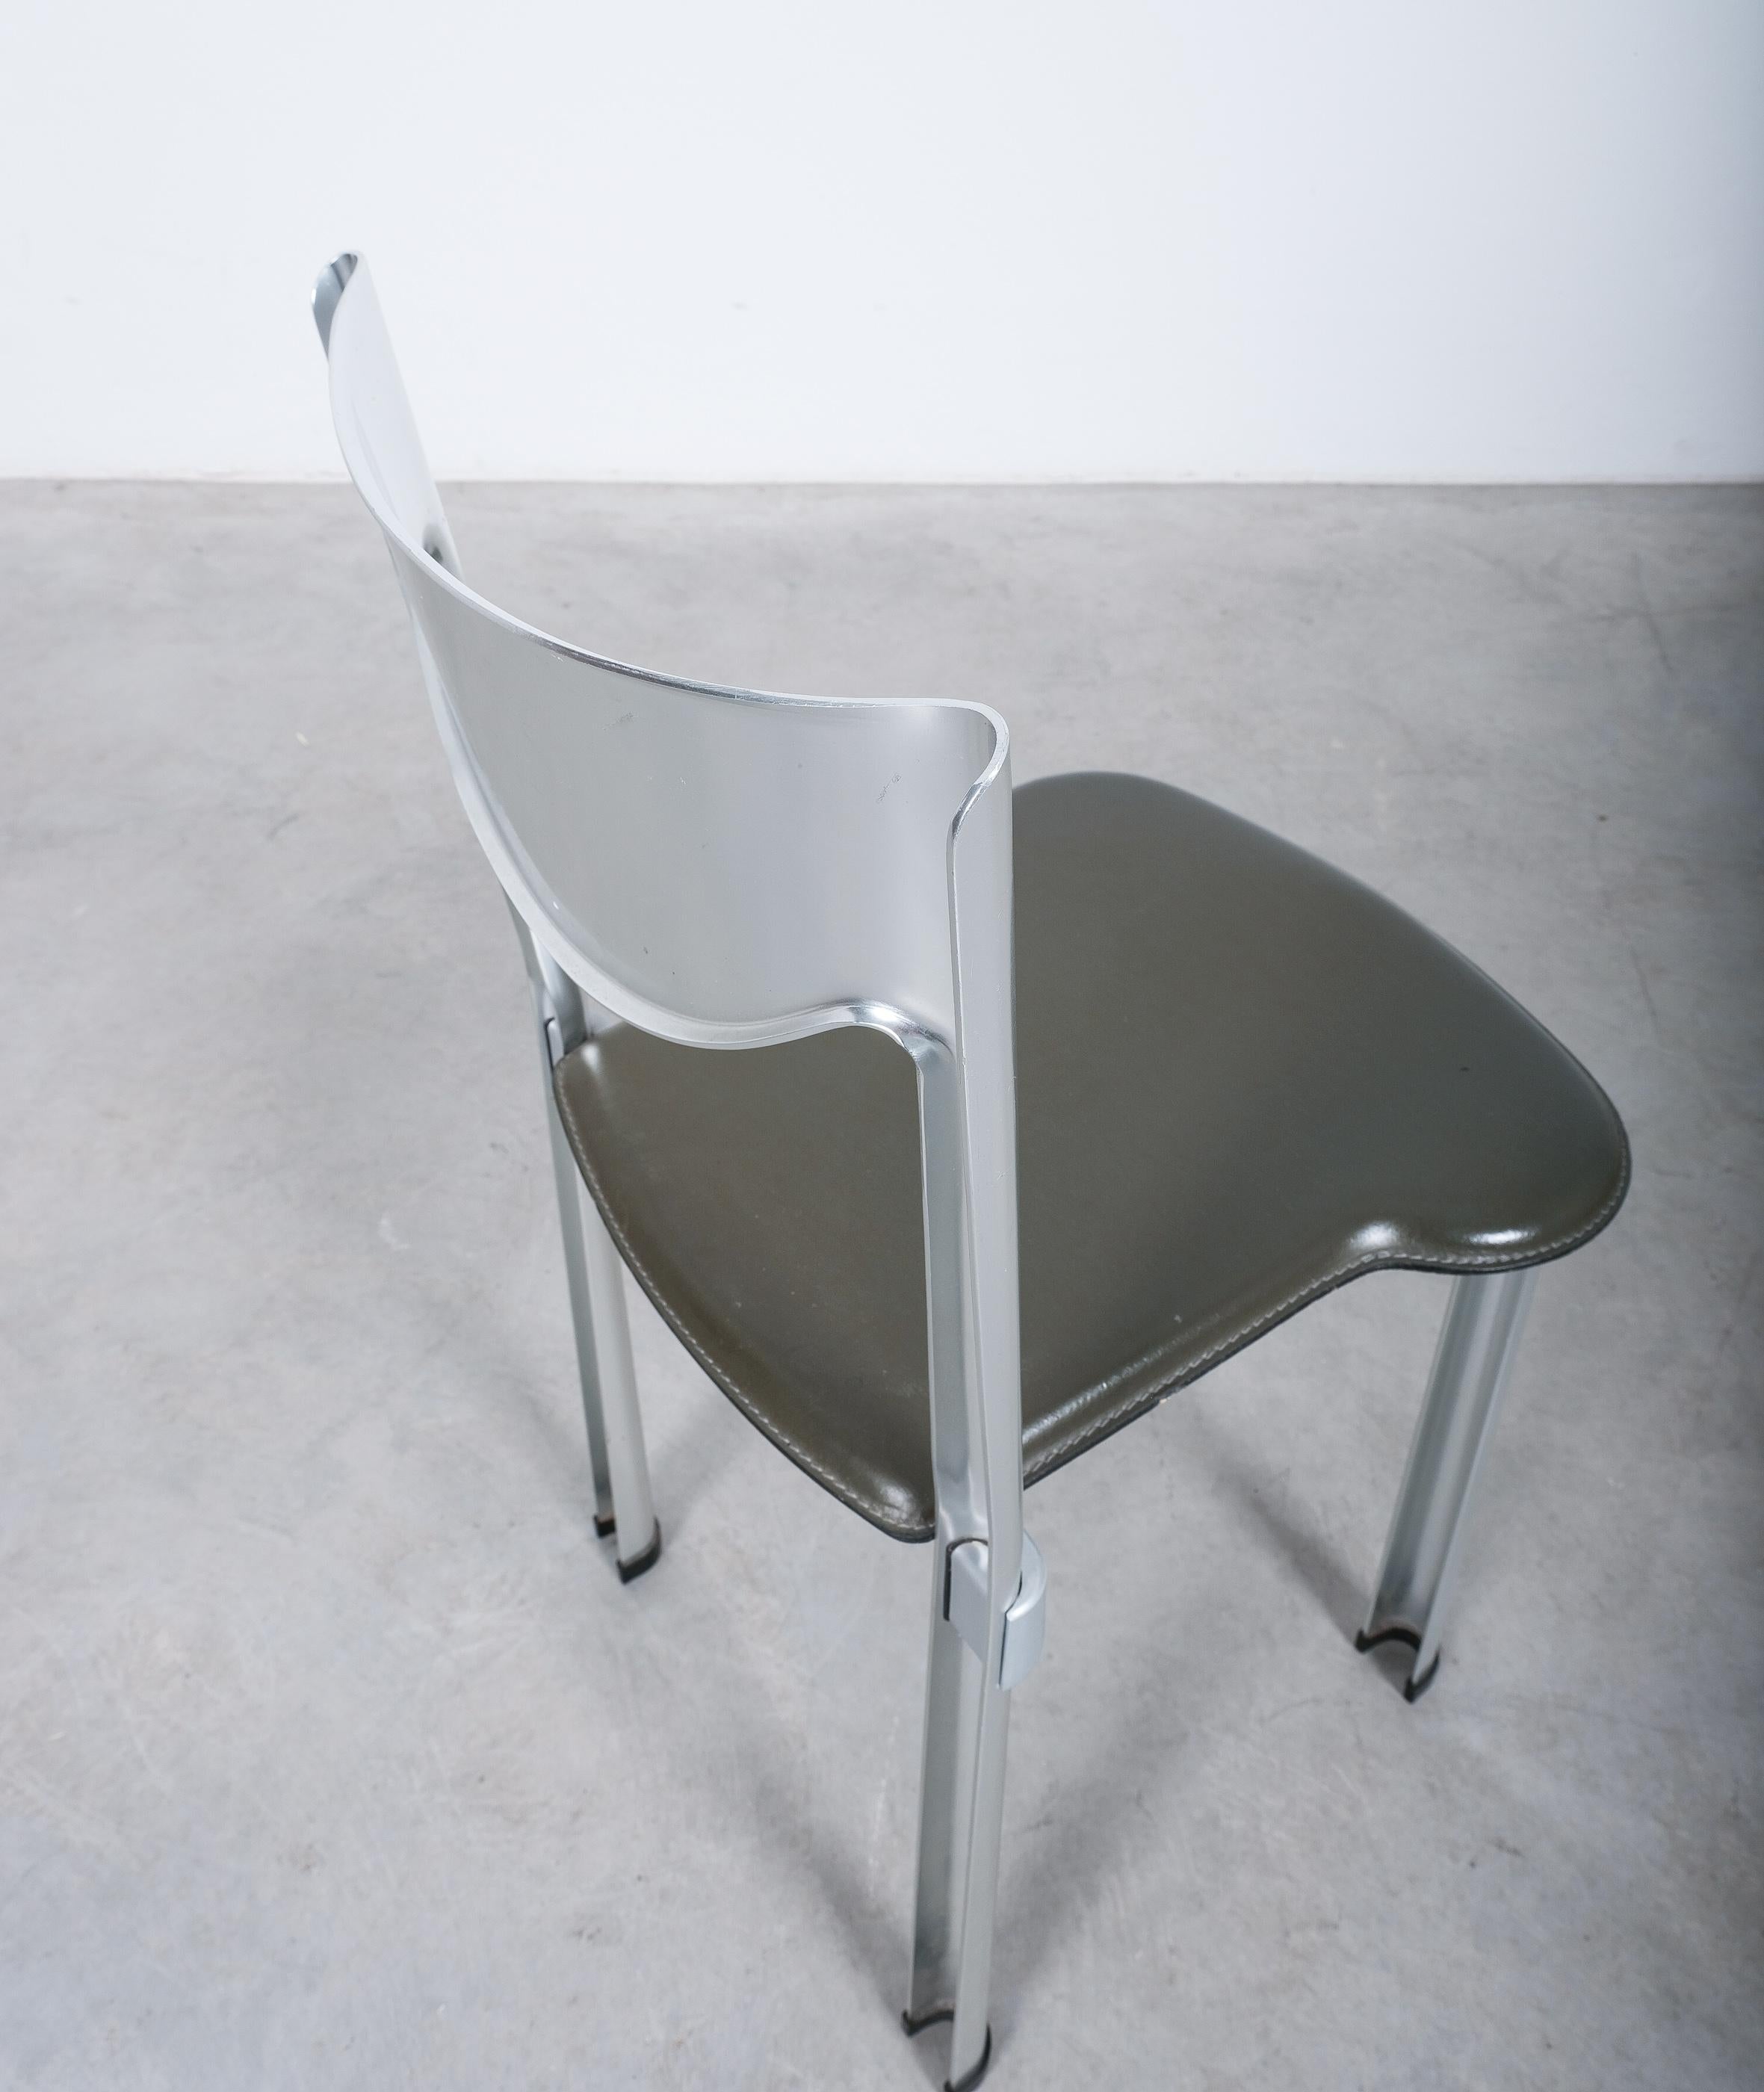 Late 20th Century Antonello Mosca for Ycami Aluminum Leather Chairs, Italy, 1980 For Sale